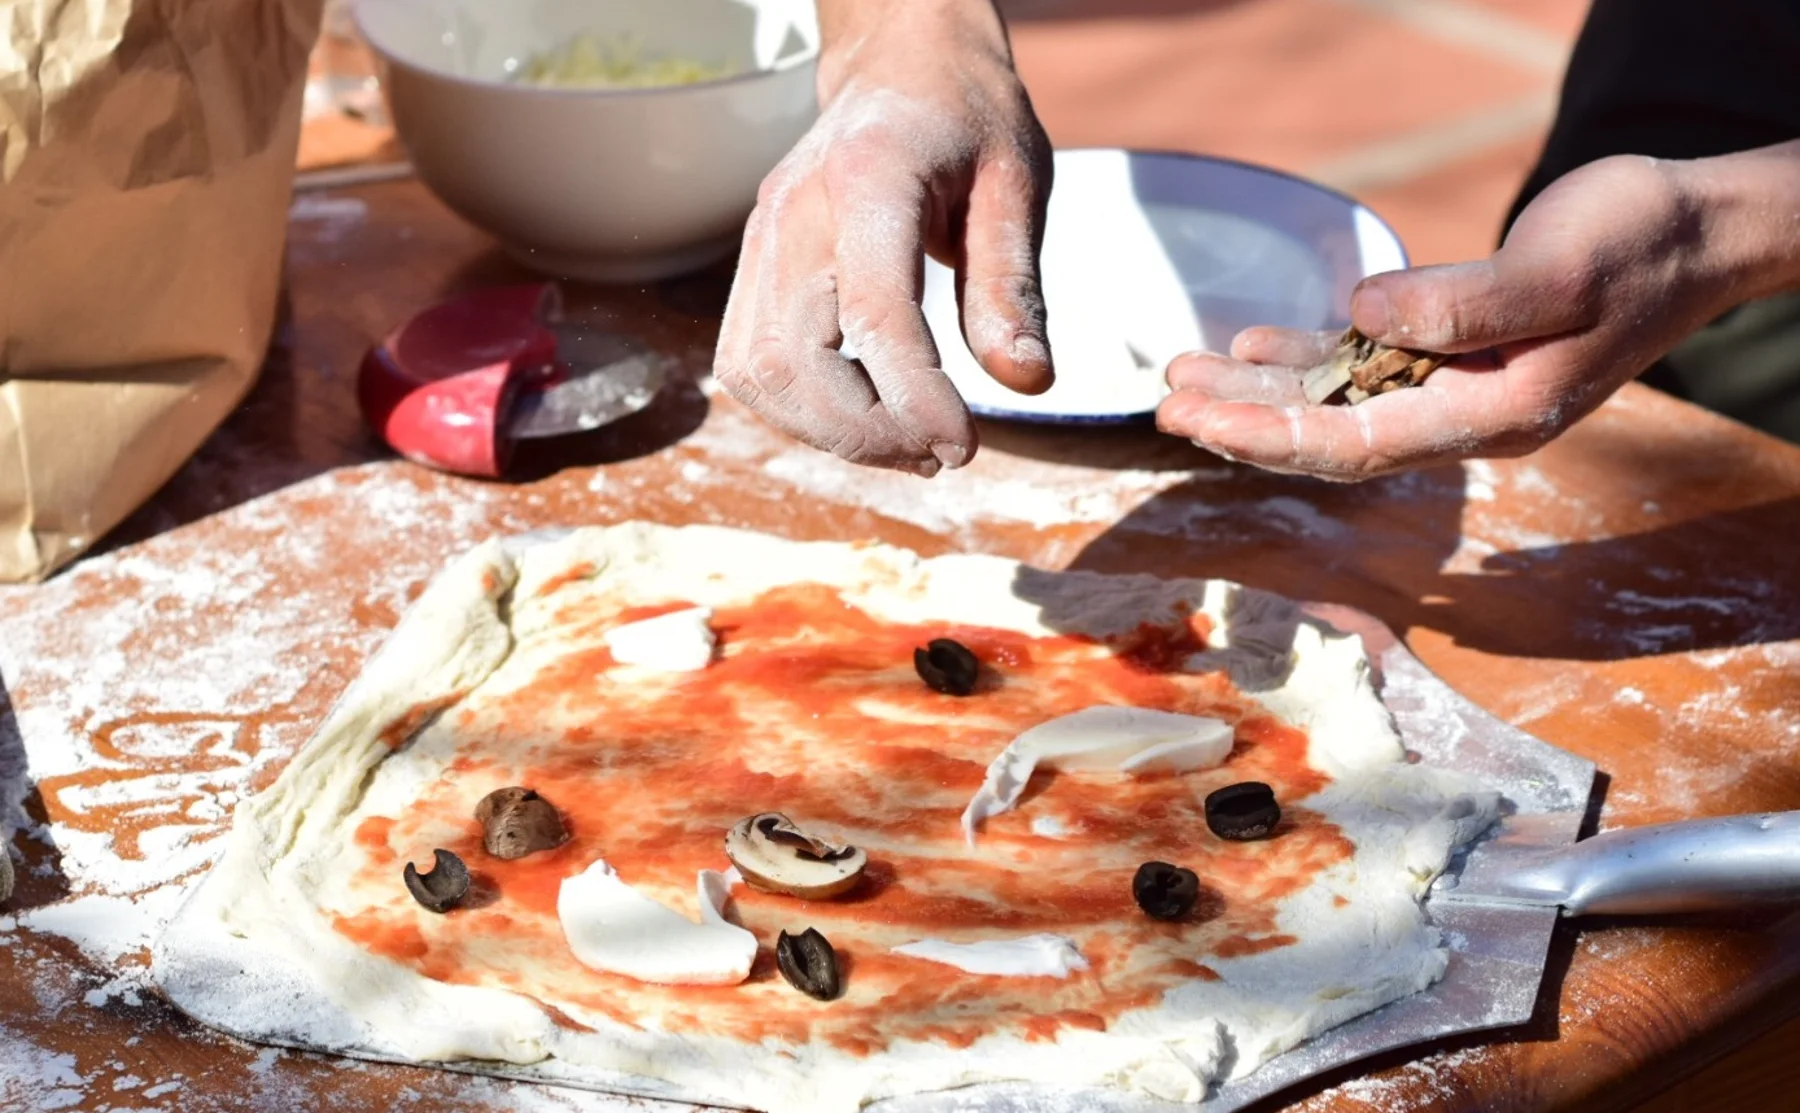 Bread and pizza cooking class in the Barcelona countryside - 646573